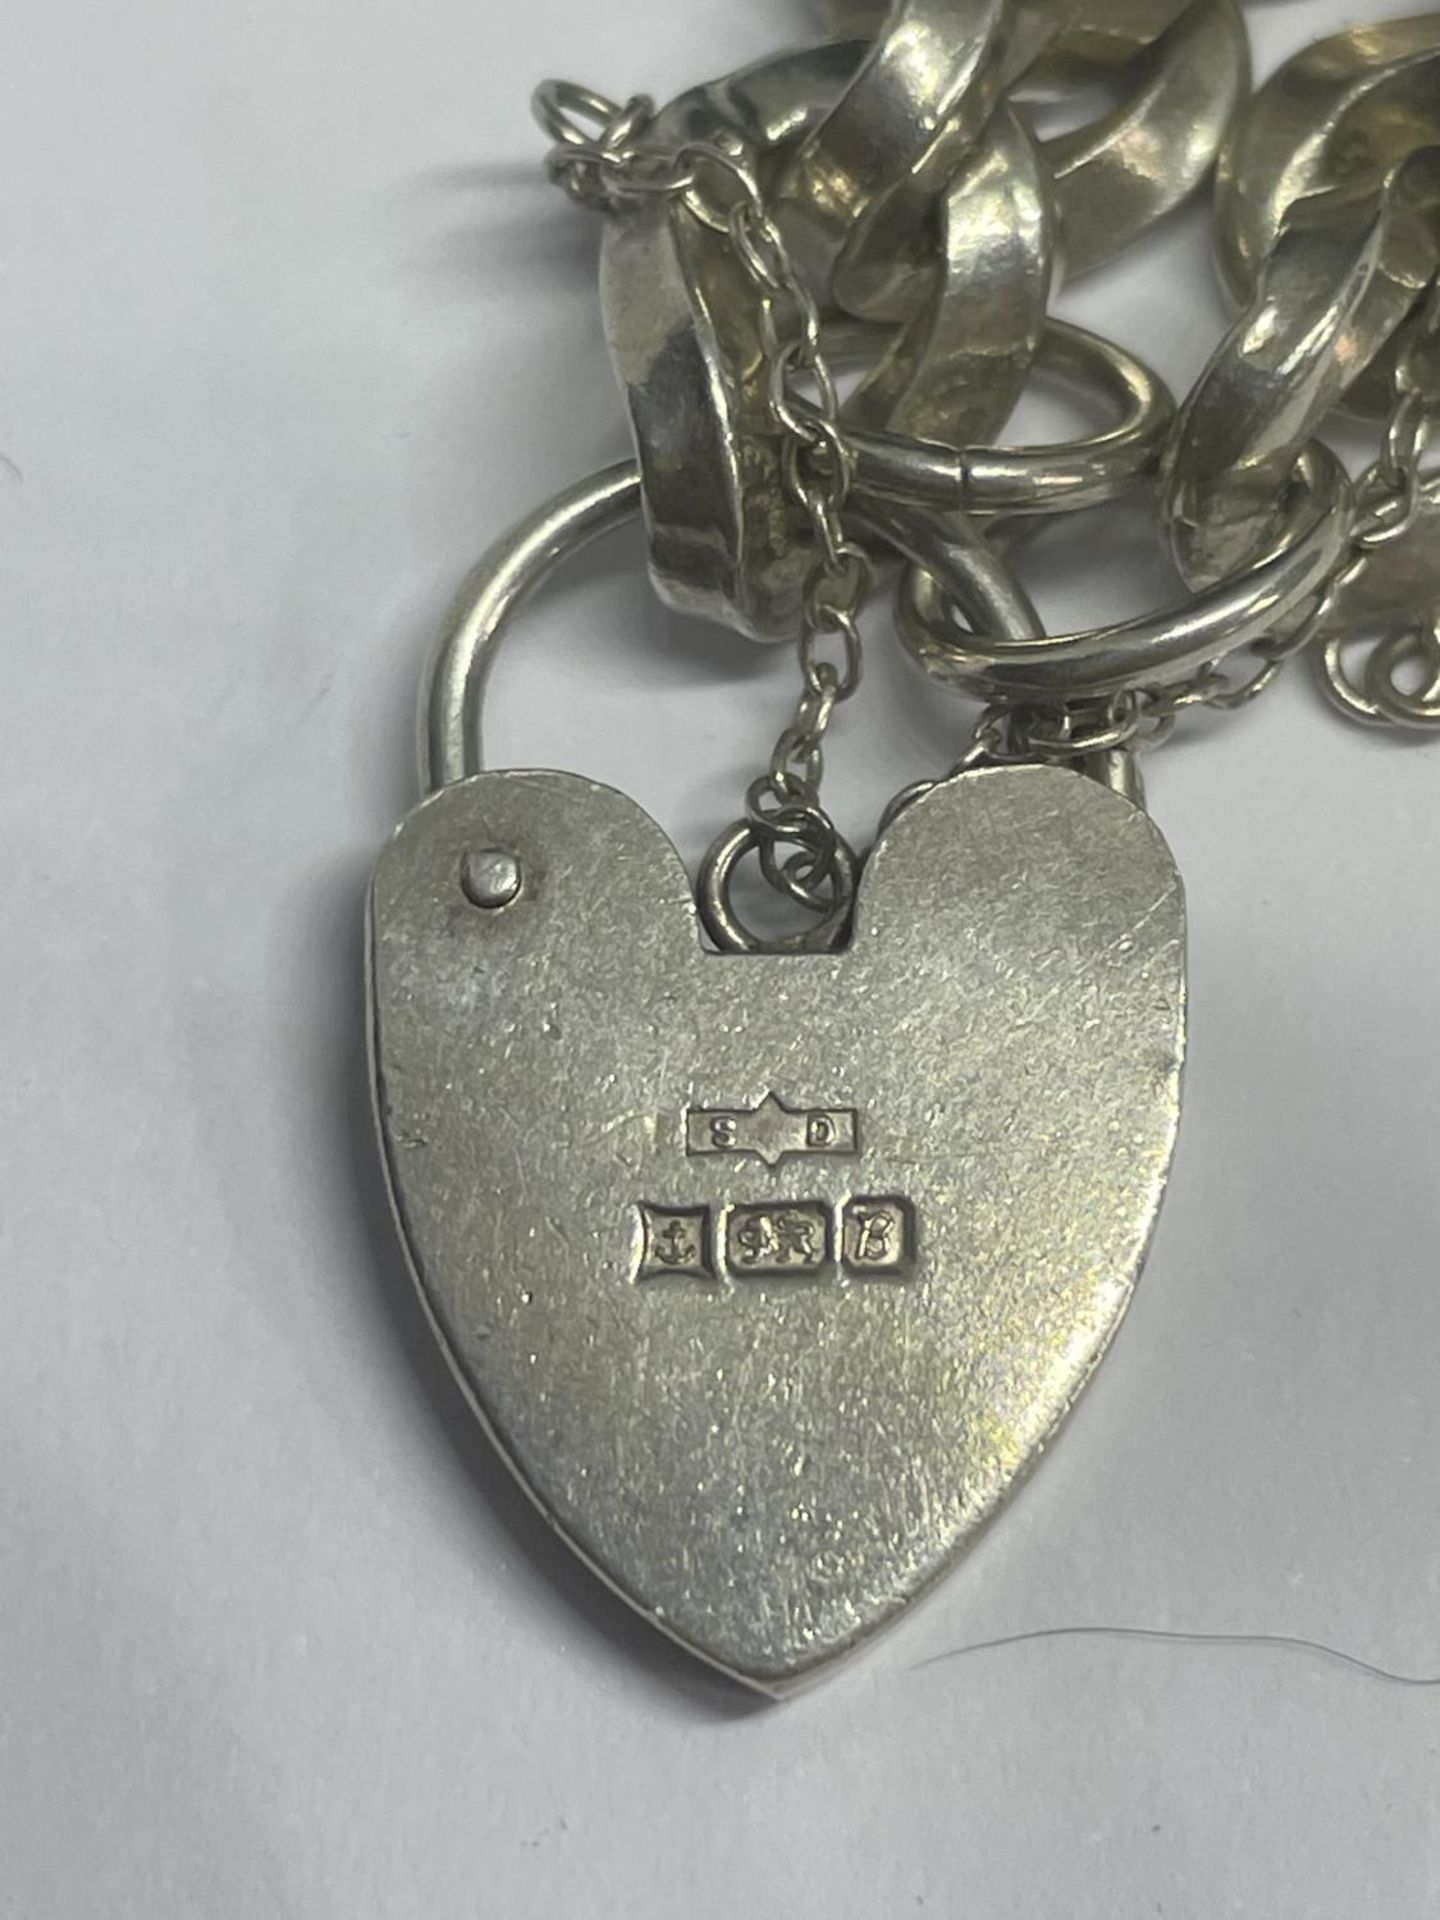 A HEAVY MARKED SILVER BRACELET WITH A HEART LOCK - Image 4 of 4